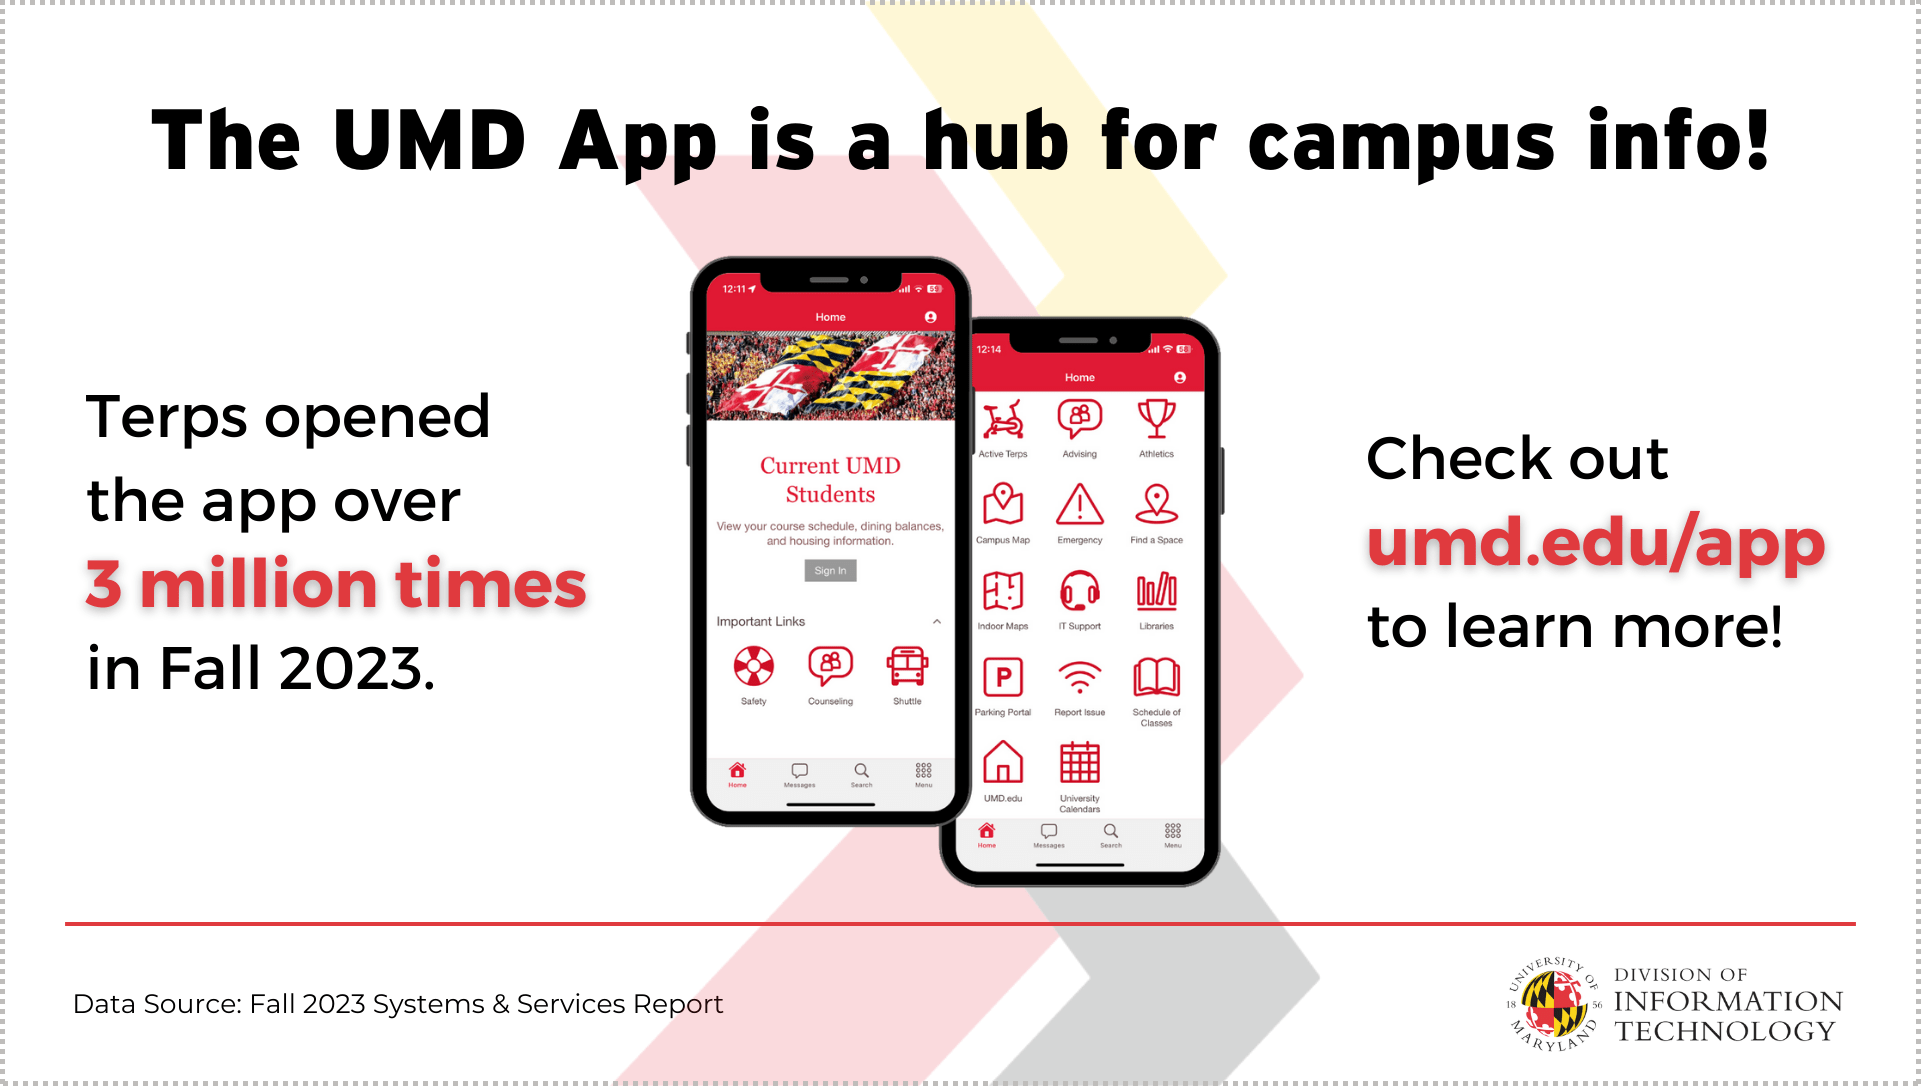 the UMD app is a hub for campus info